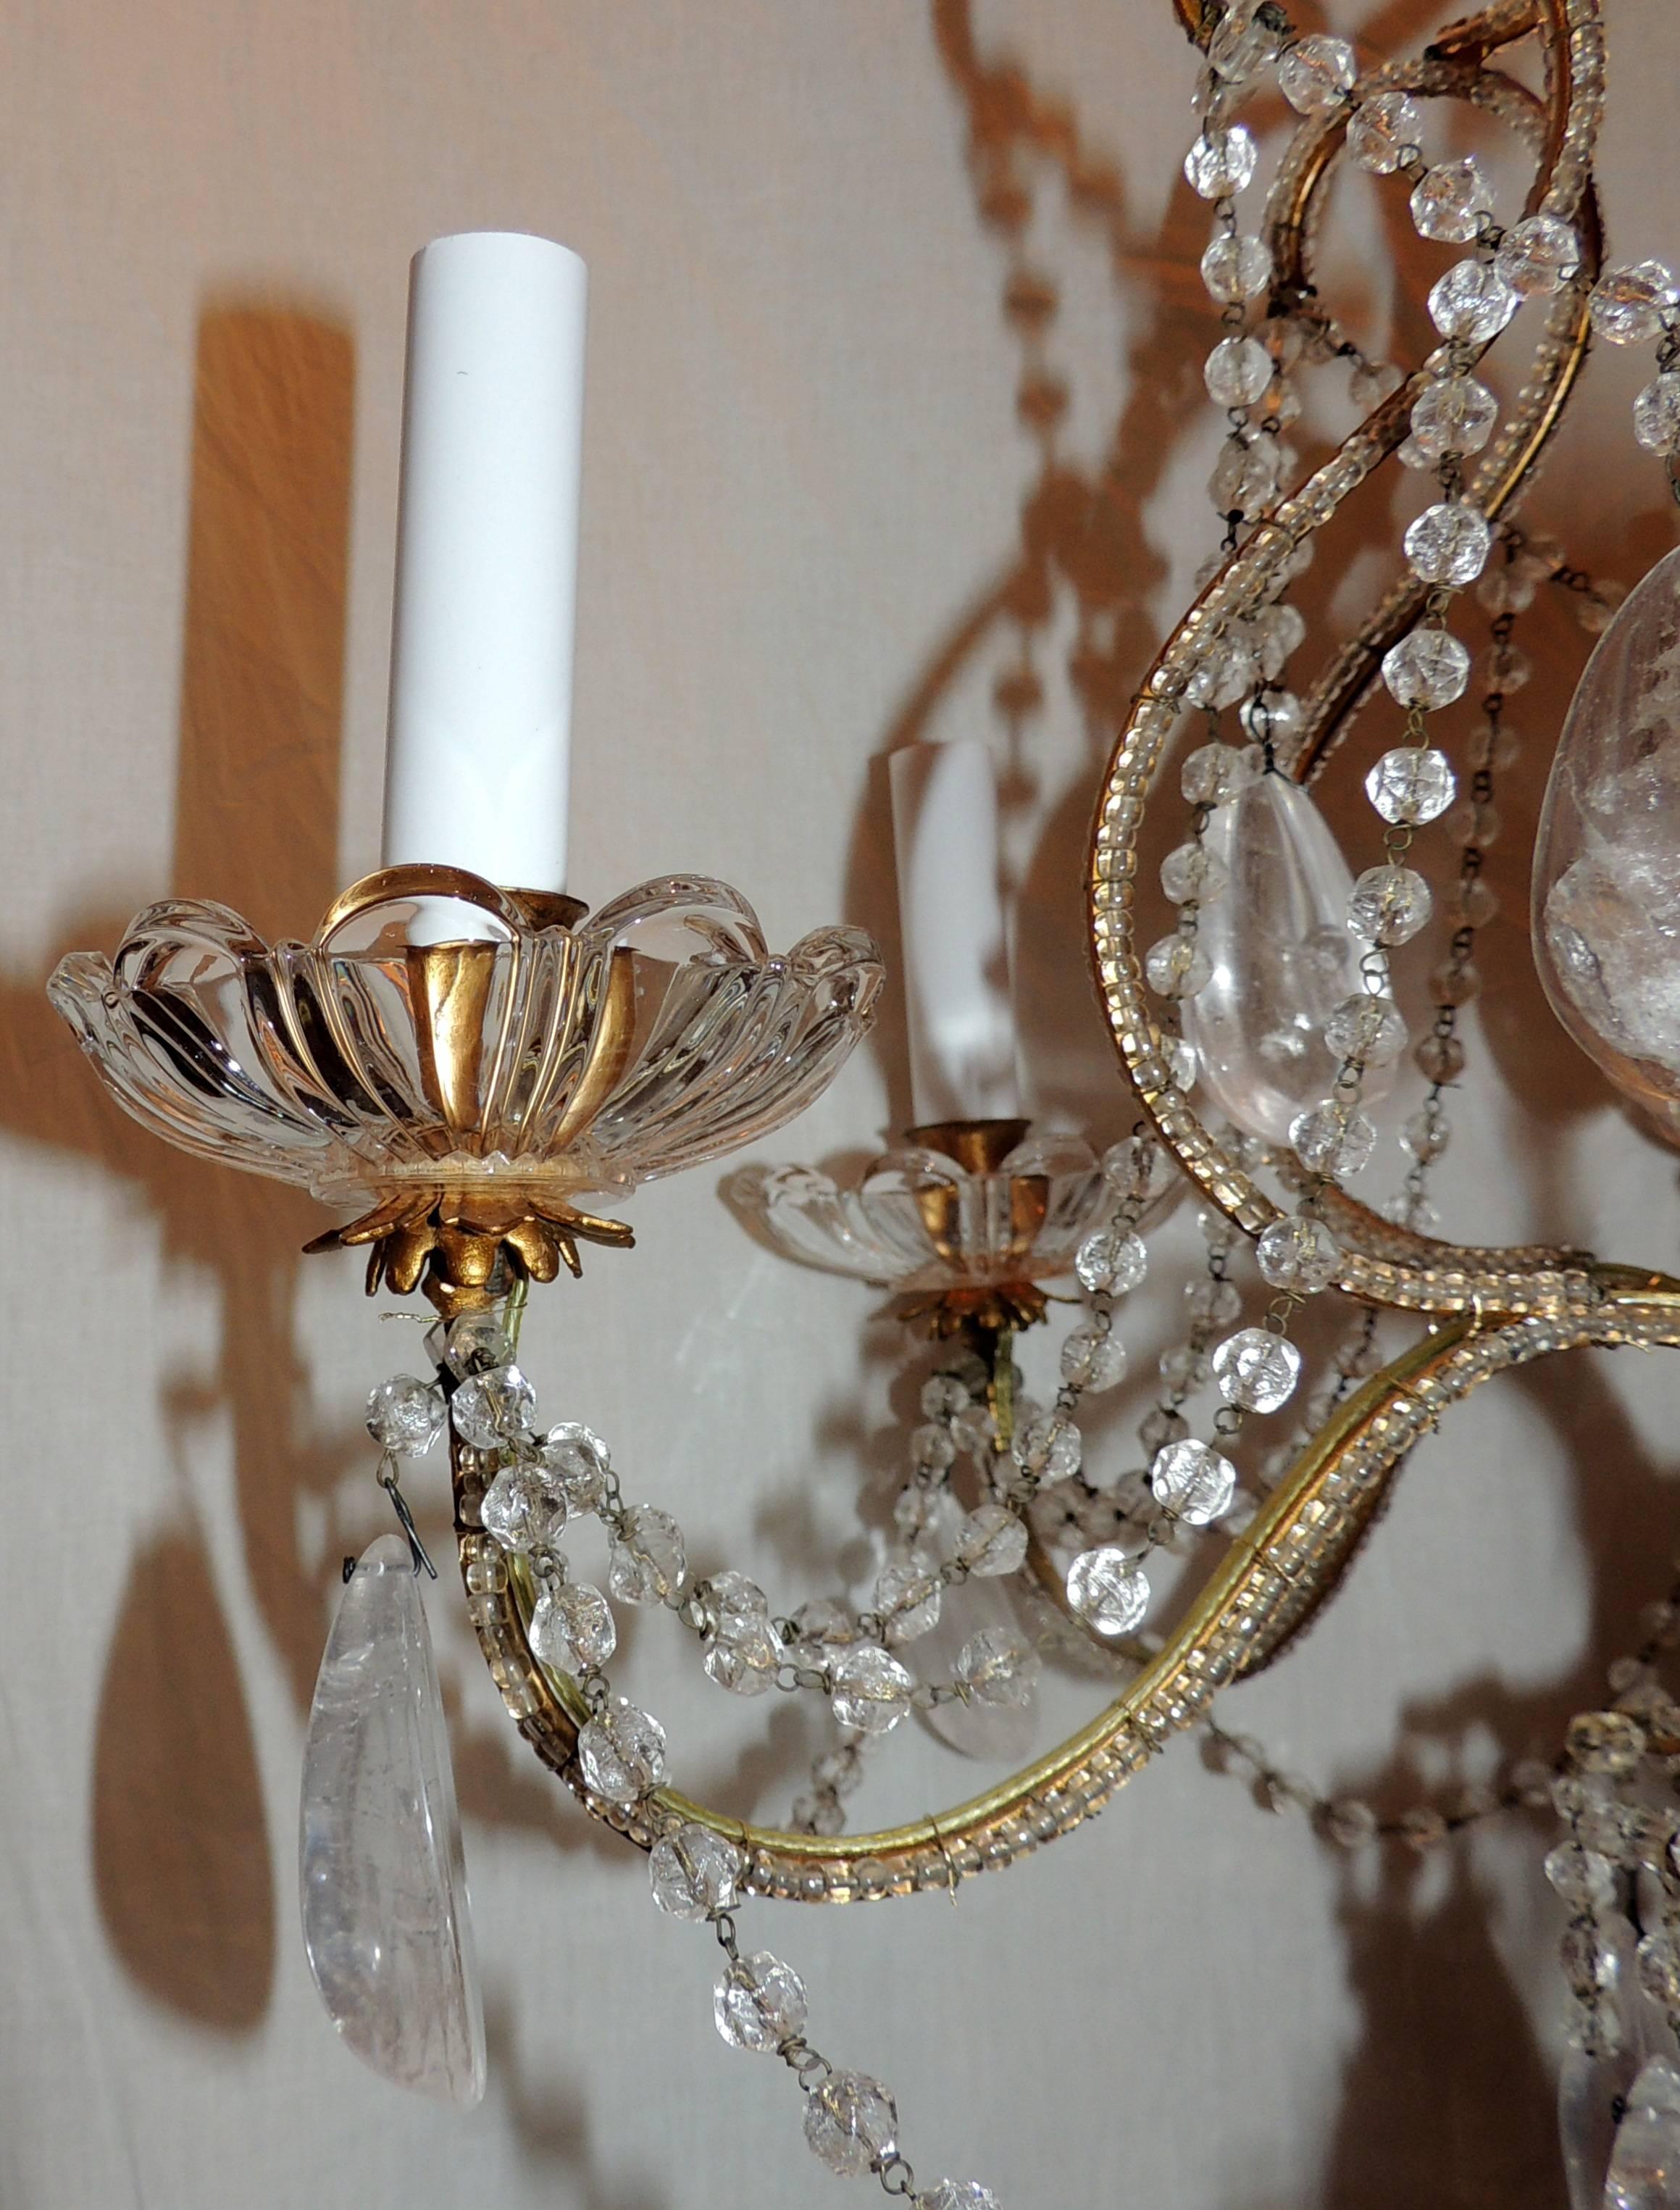 Mid-20th Century Wonderful French Beaded Rock Crystal Maison Baguès Bird Cage Baccarat Chandelier